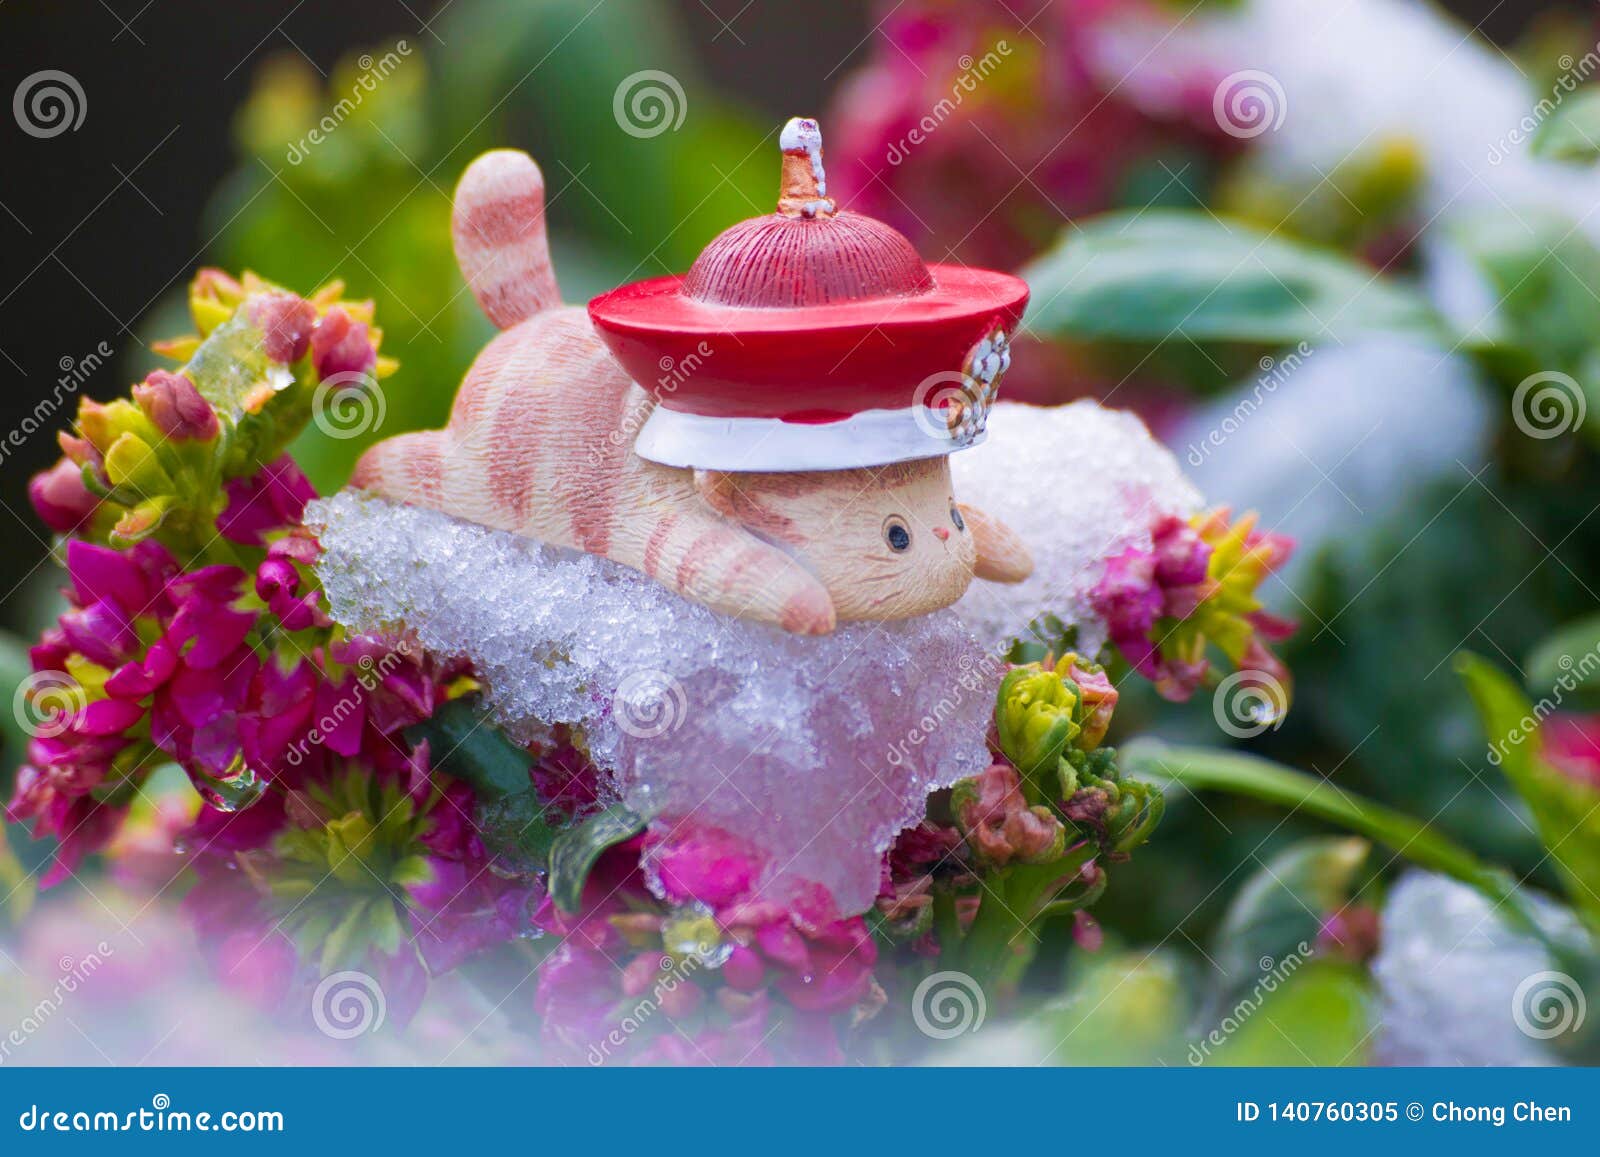 toy cat lie prone on ice of flowers